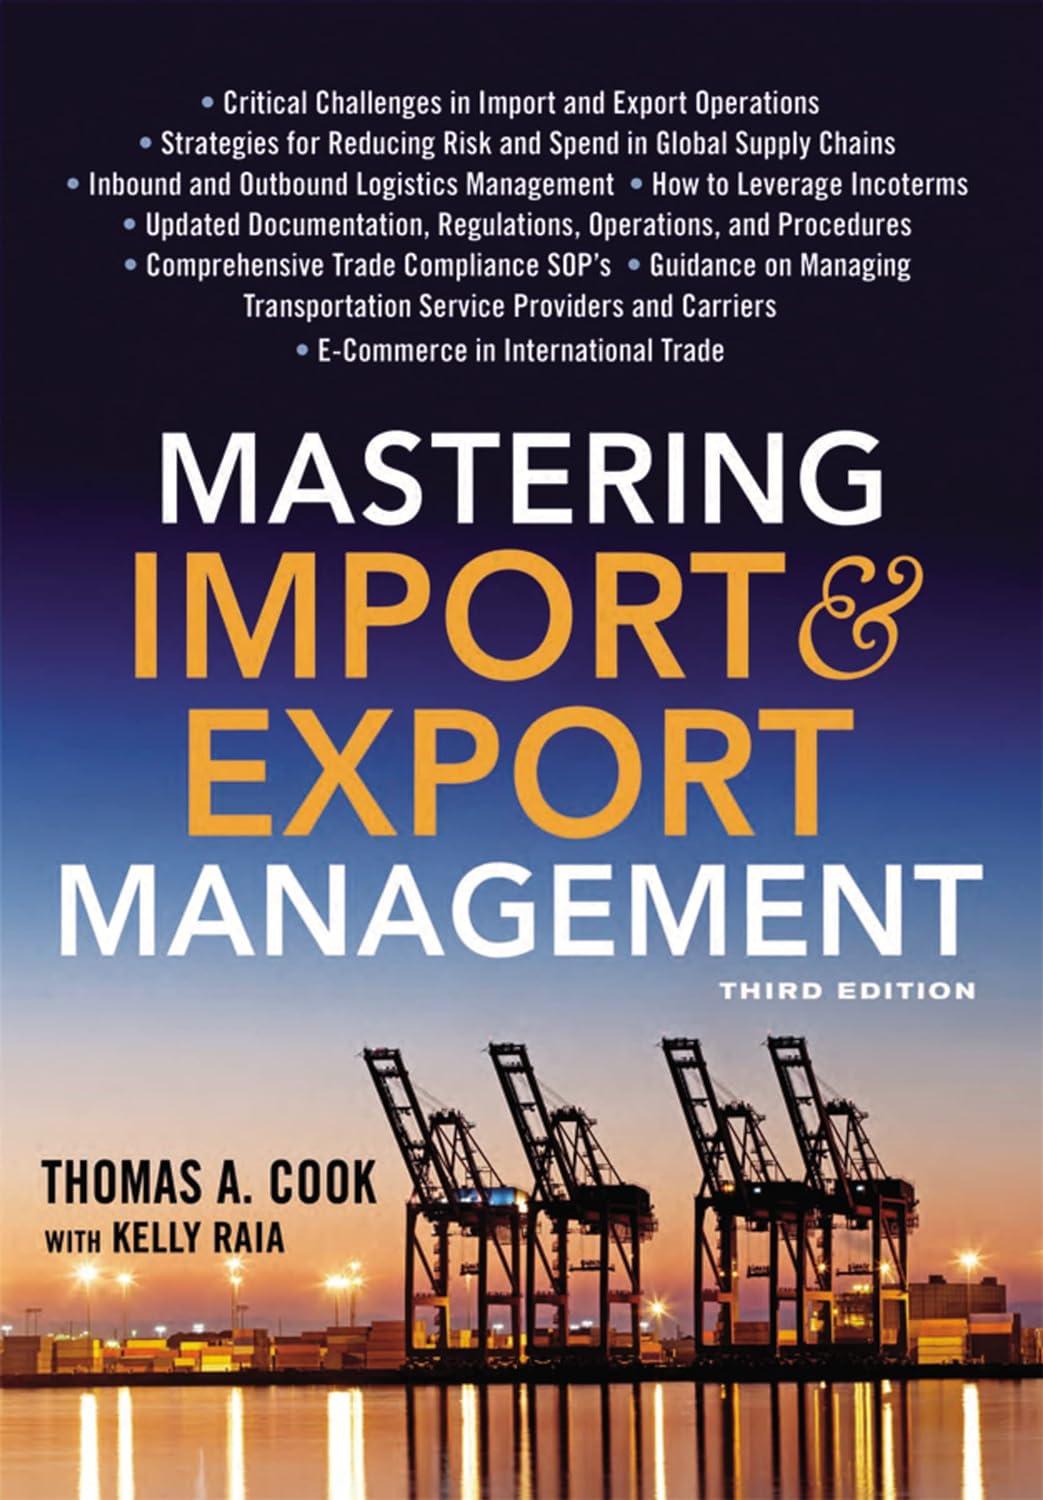 mastering import and export management 3rd edition thomas cook, kelly raia 0814438202, 978-0814438206